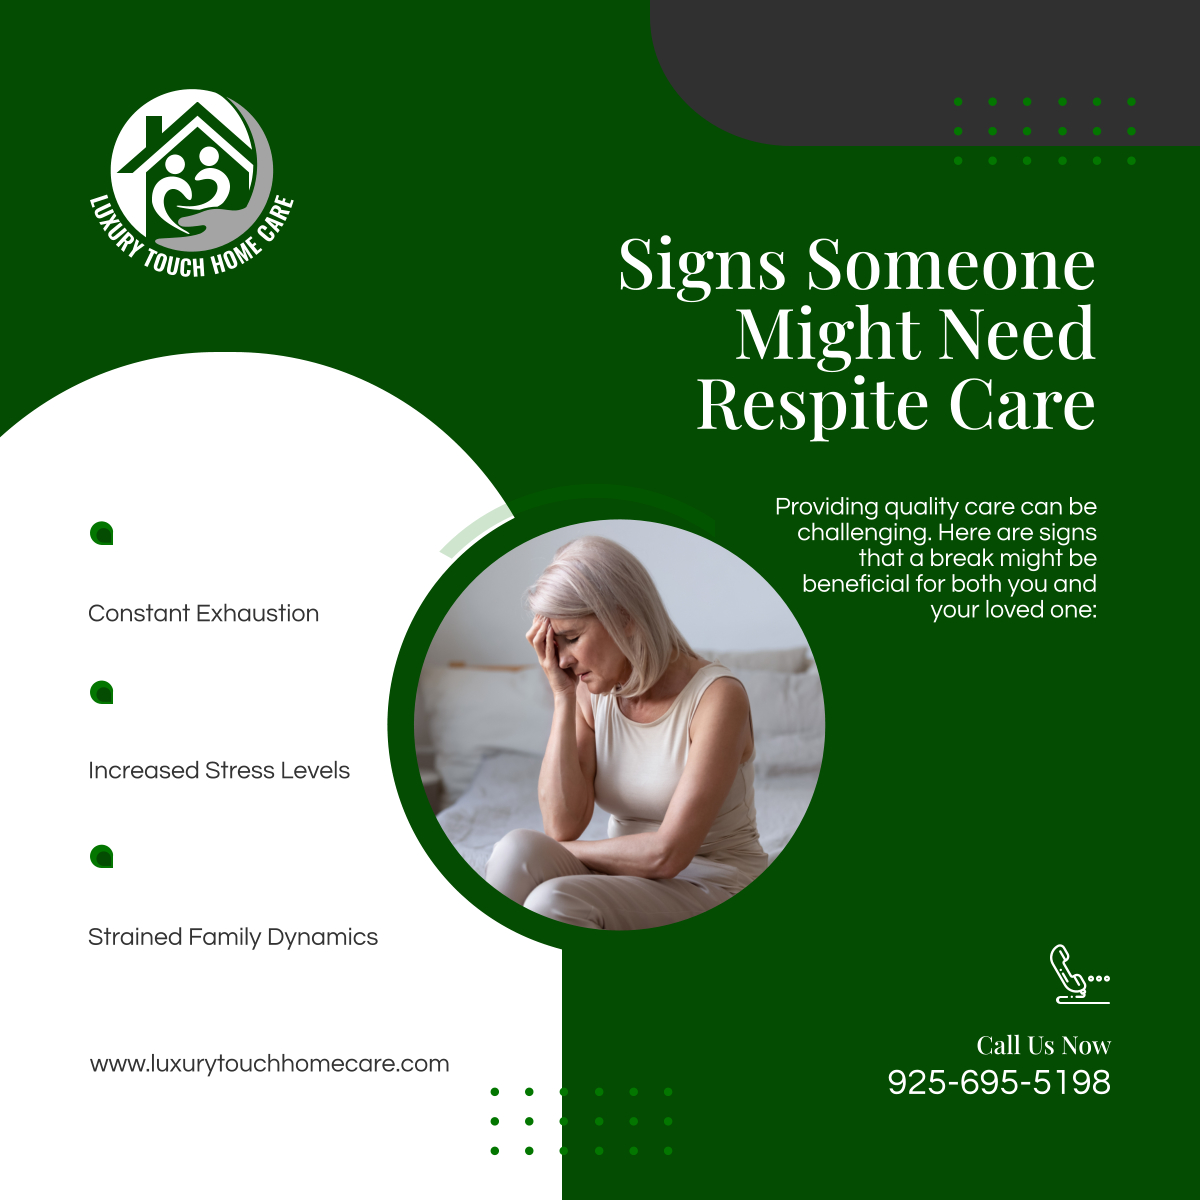 Caring for a loved one is a selfless act, but it can also be demanding. These signs might indicate it's time for respite care. Let our team support you! 

#WaterfordCA #HomeCareServices #RespiteCare